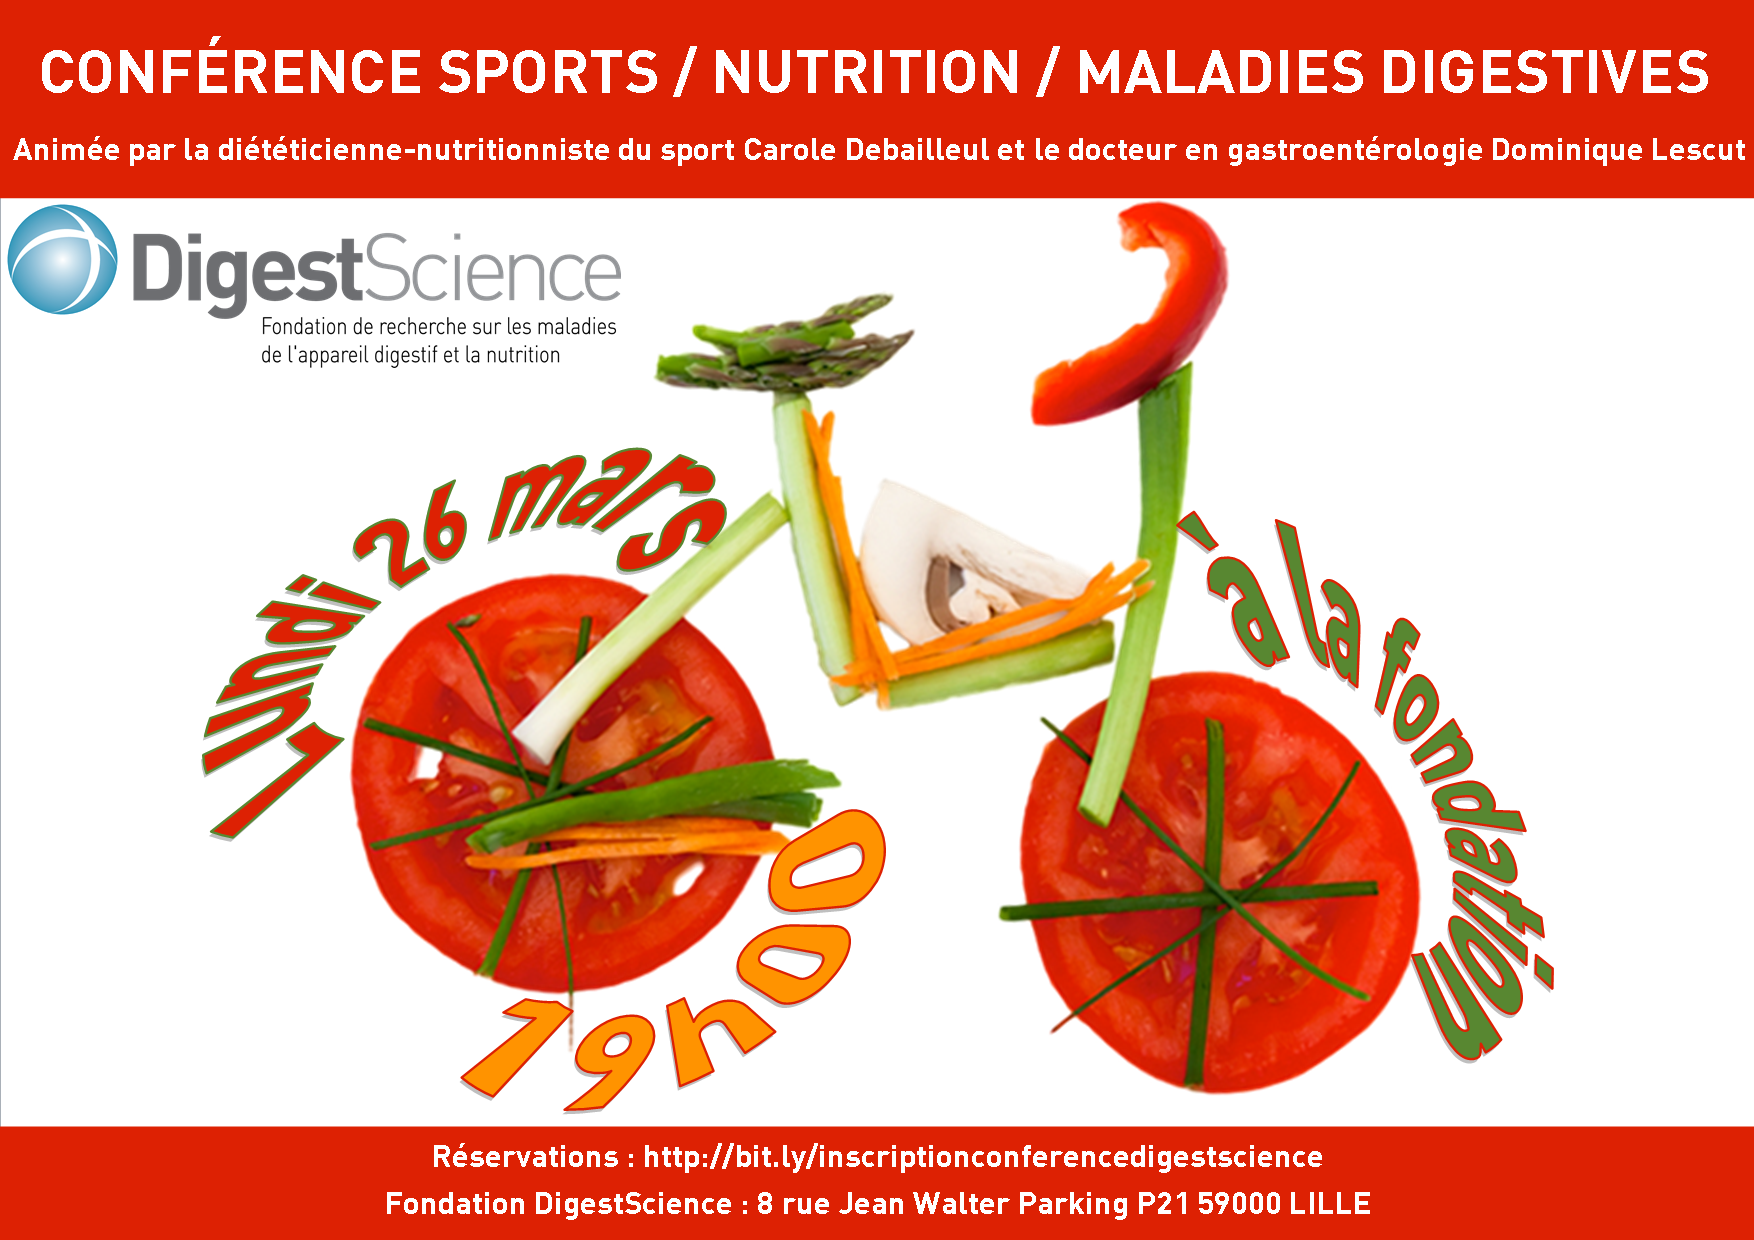 conference sports nutrition maladies digestives